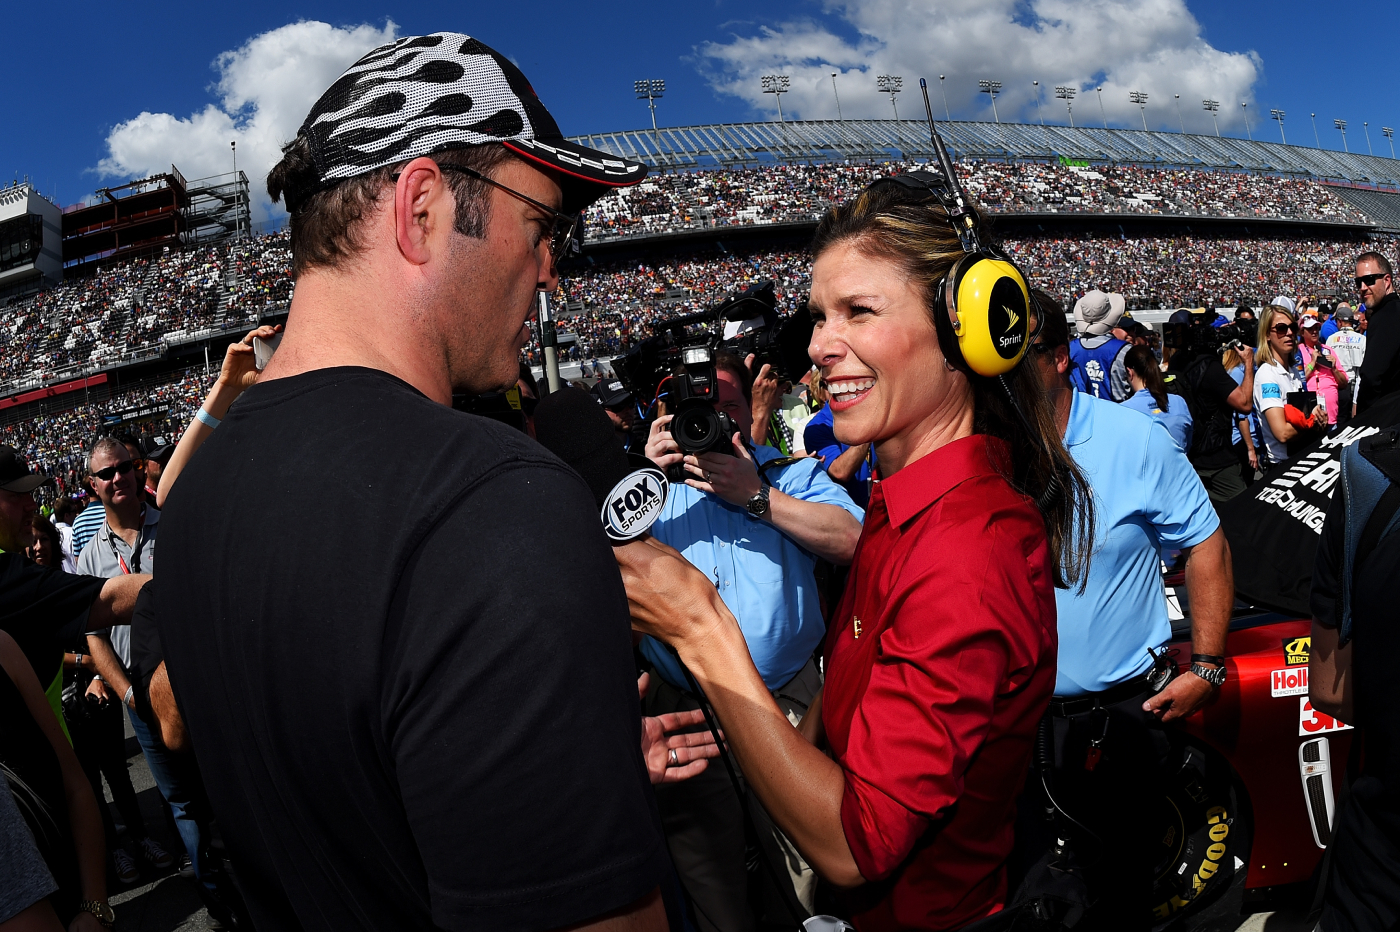 Jamie Little has already made history throughout her career covering NASCAR. She is continuing to do that even more so now with her new job.